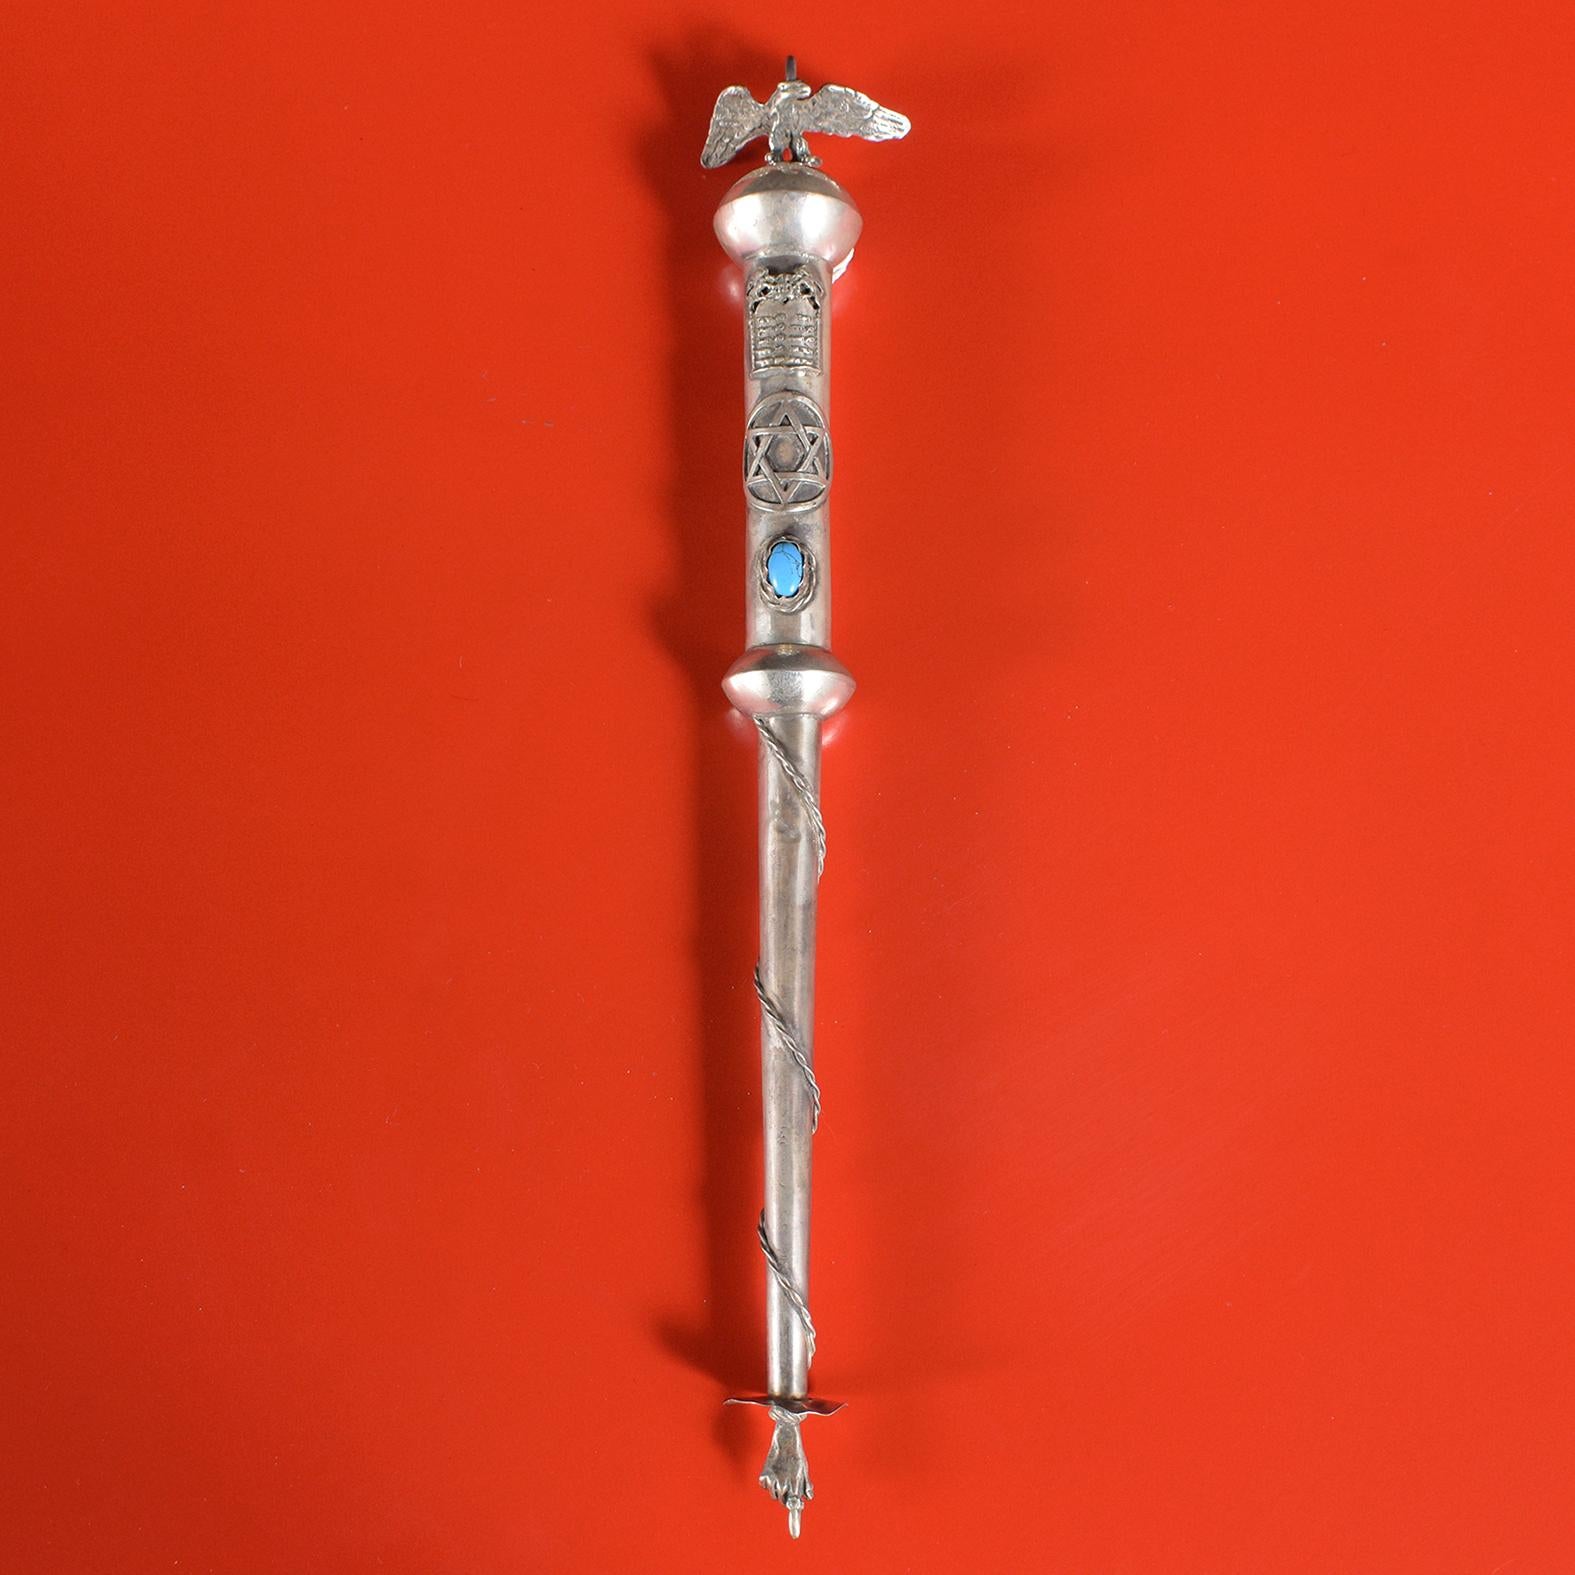 This sterling silver Torah pointer (Yad) from Israel has a hammered finish on the handle and a sterling silver chain on the end to hang on the Torah. The tip has an index finger pointing, making it easier for the reader to follow along. A beautiful